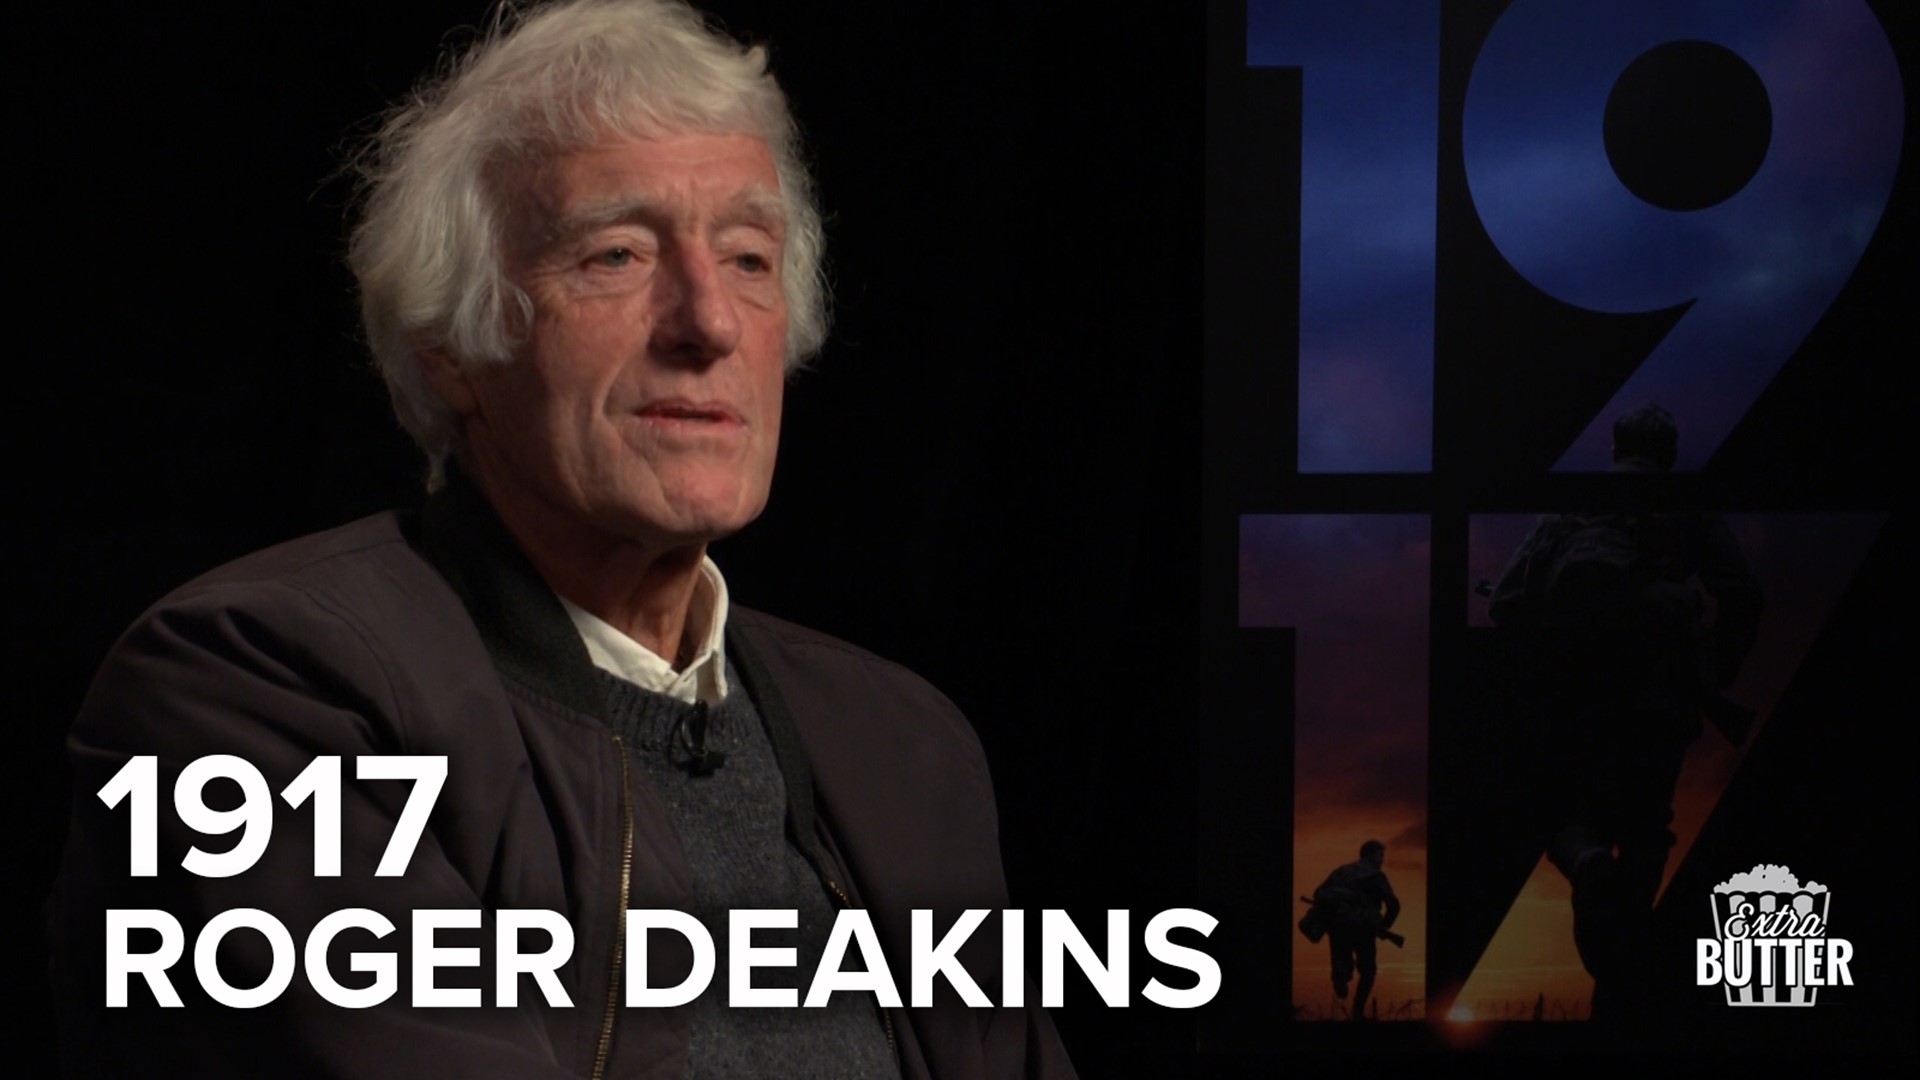 Roger Deakins talks about filming the unique one-take for the movie 1917. Roger tells about the challenges and what it took to make Sam Mendes' vision happen.